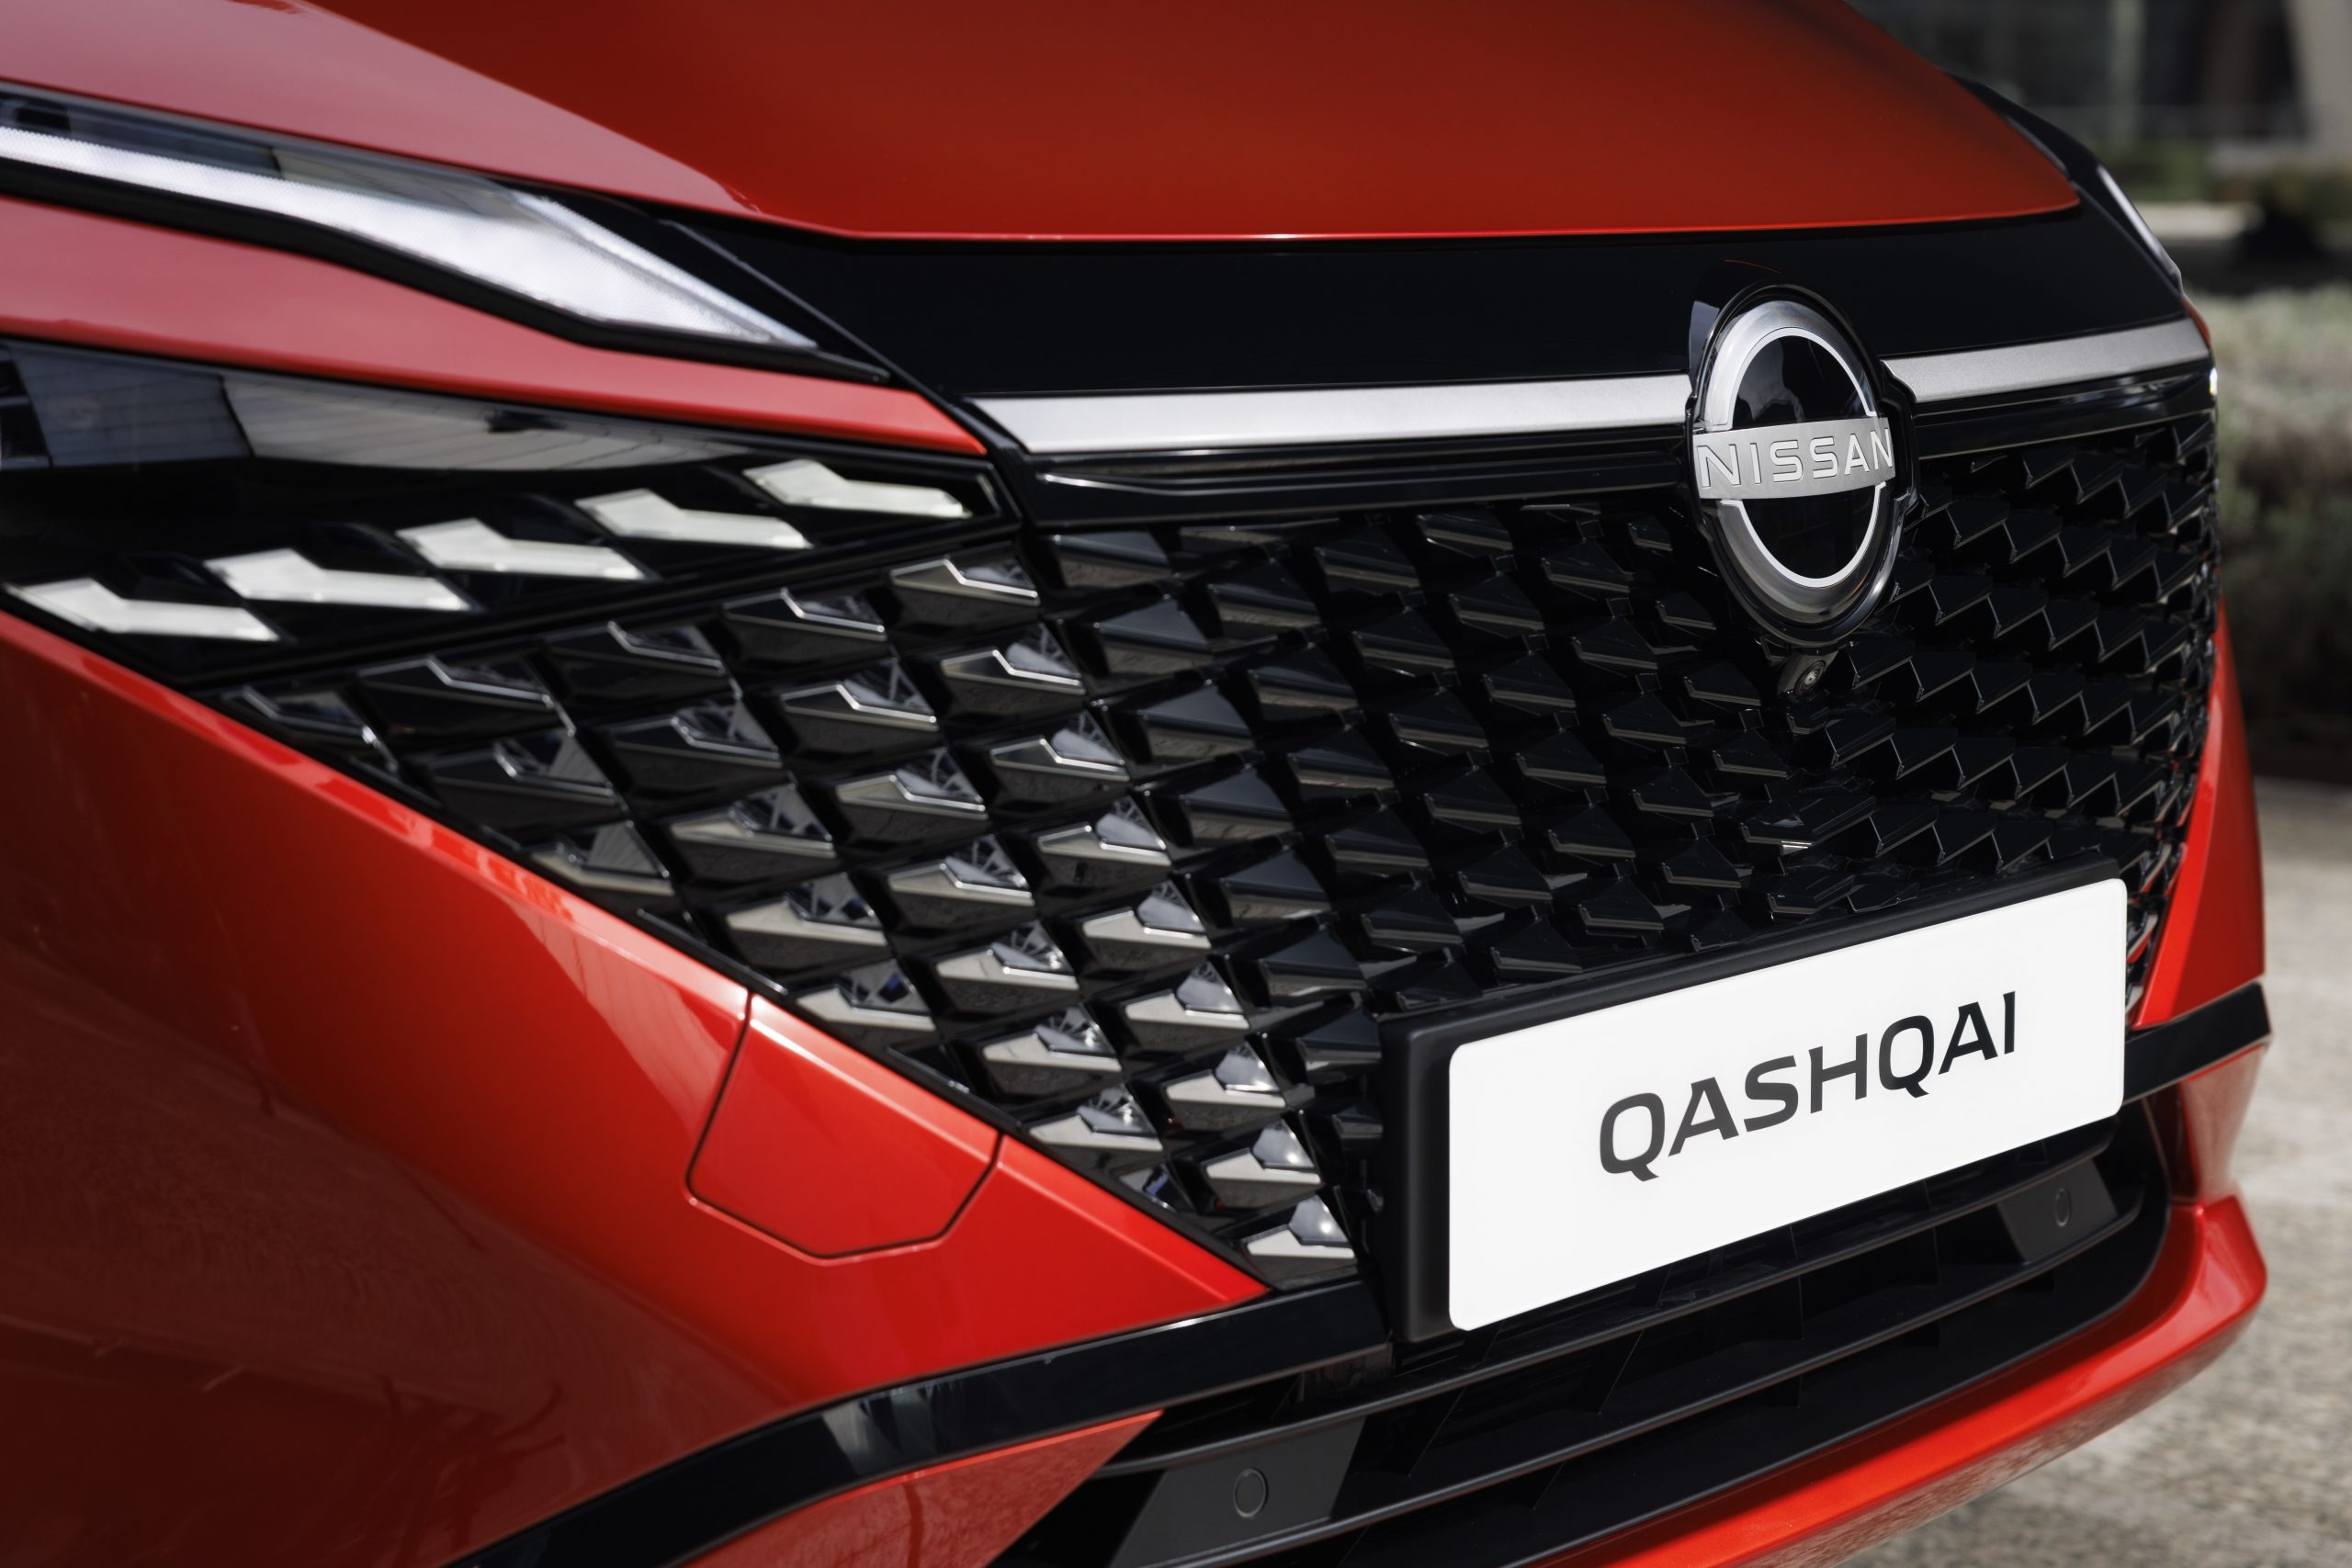 Refreshed Qashqai: takes to the roads with bold restyling, upgraded tech & Nissan’s unique e-POWER system